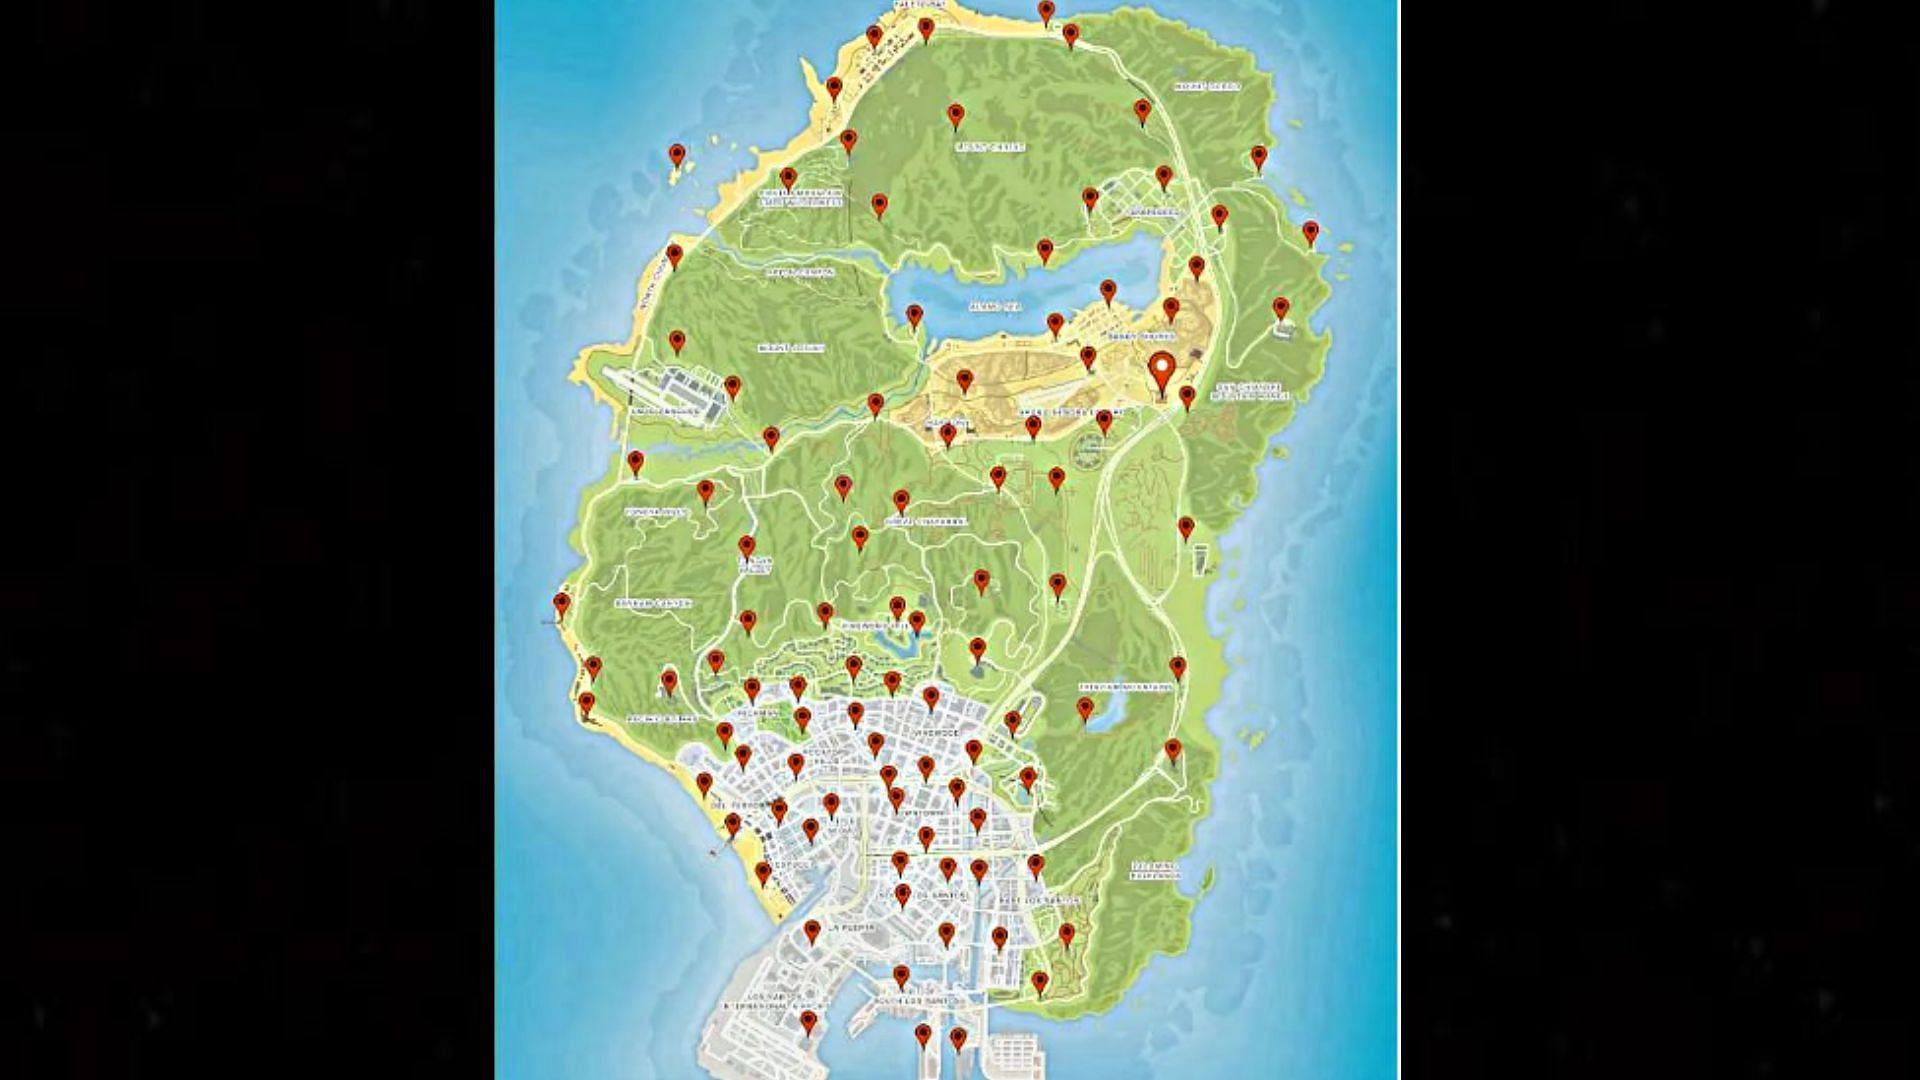 All Action Figure locations in GTA Online (Image via GTAWiki)